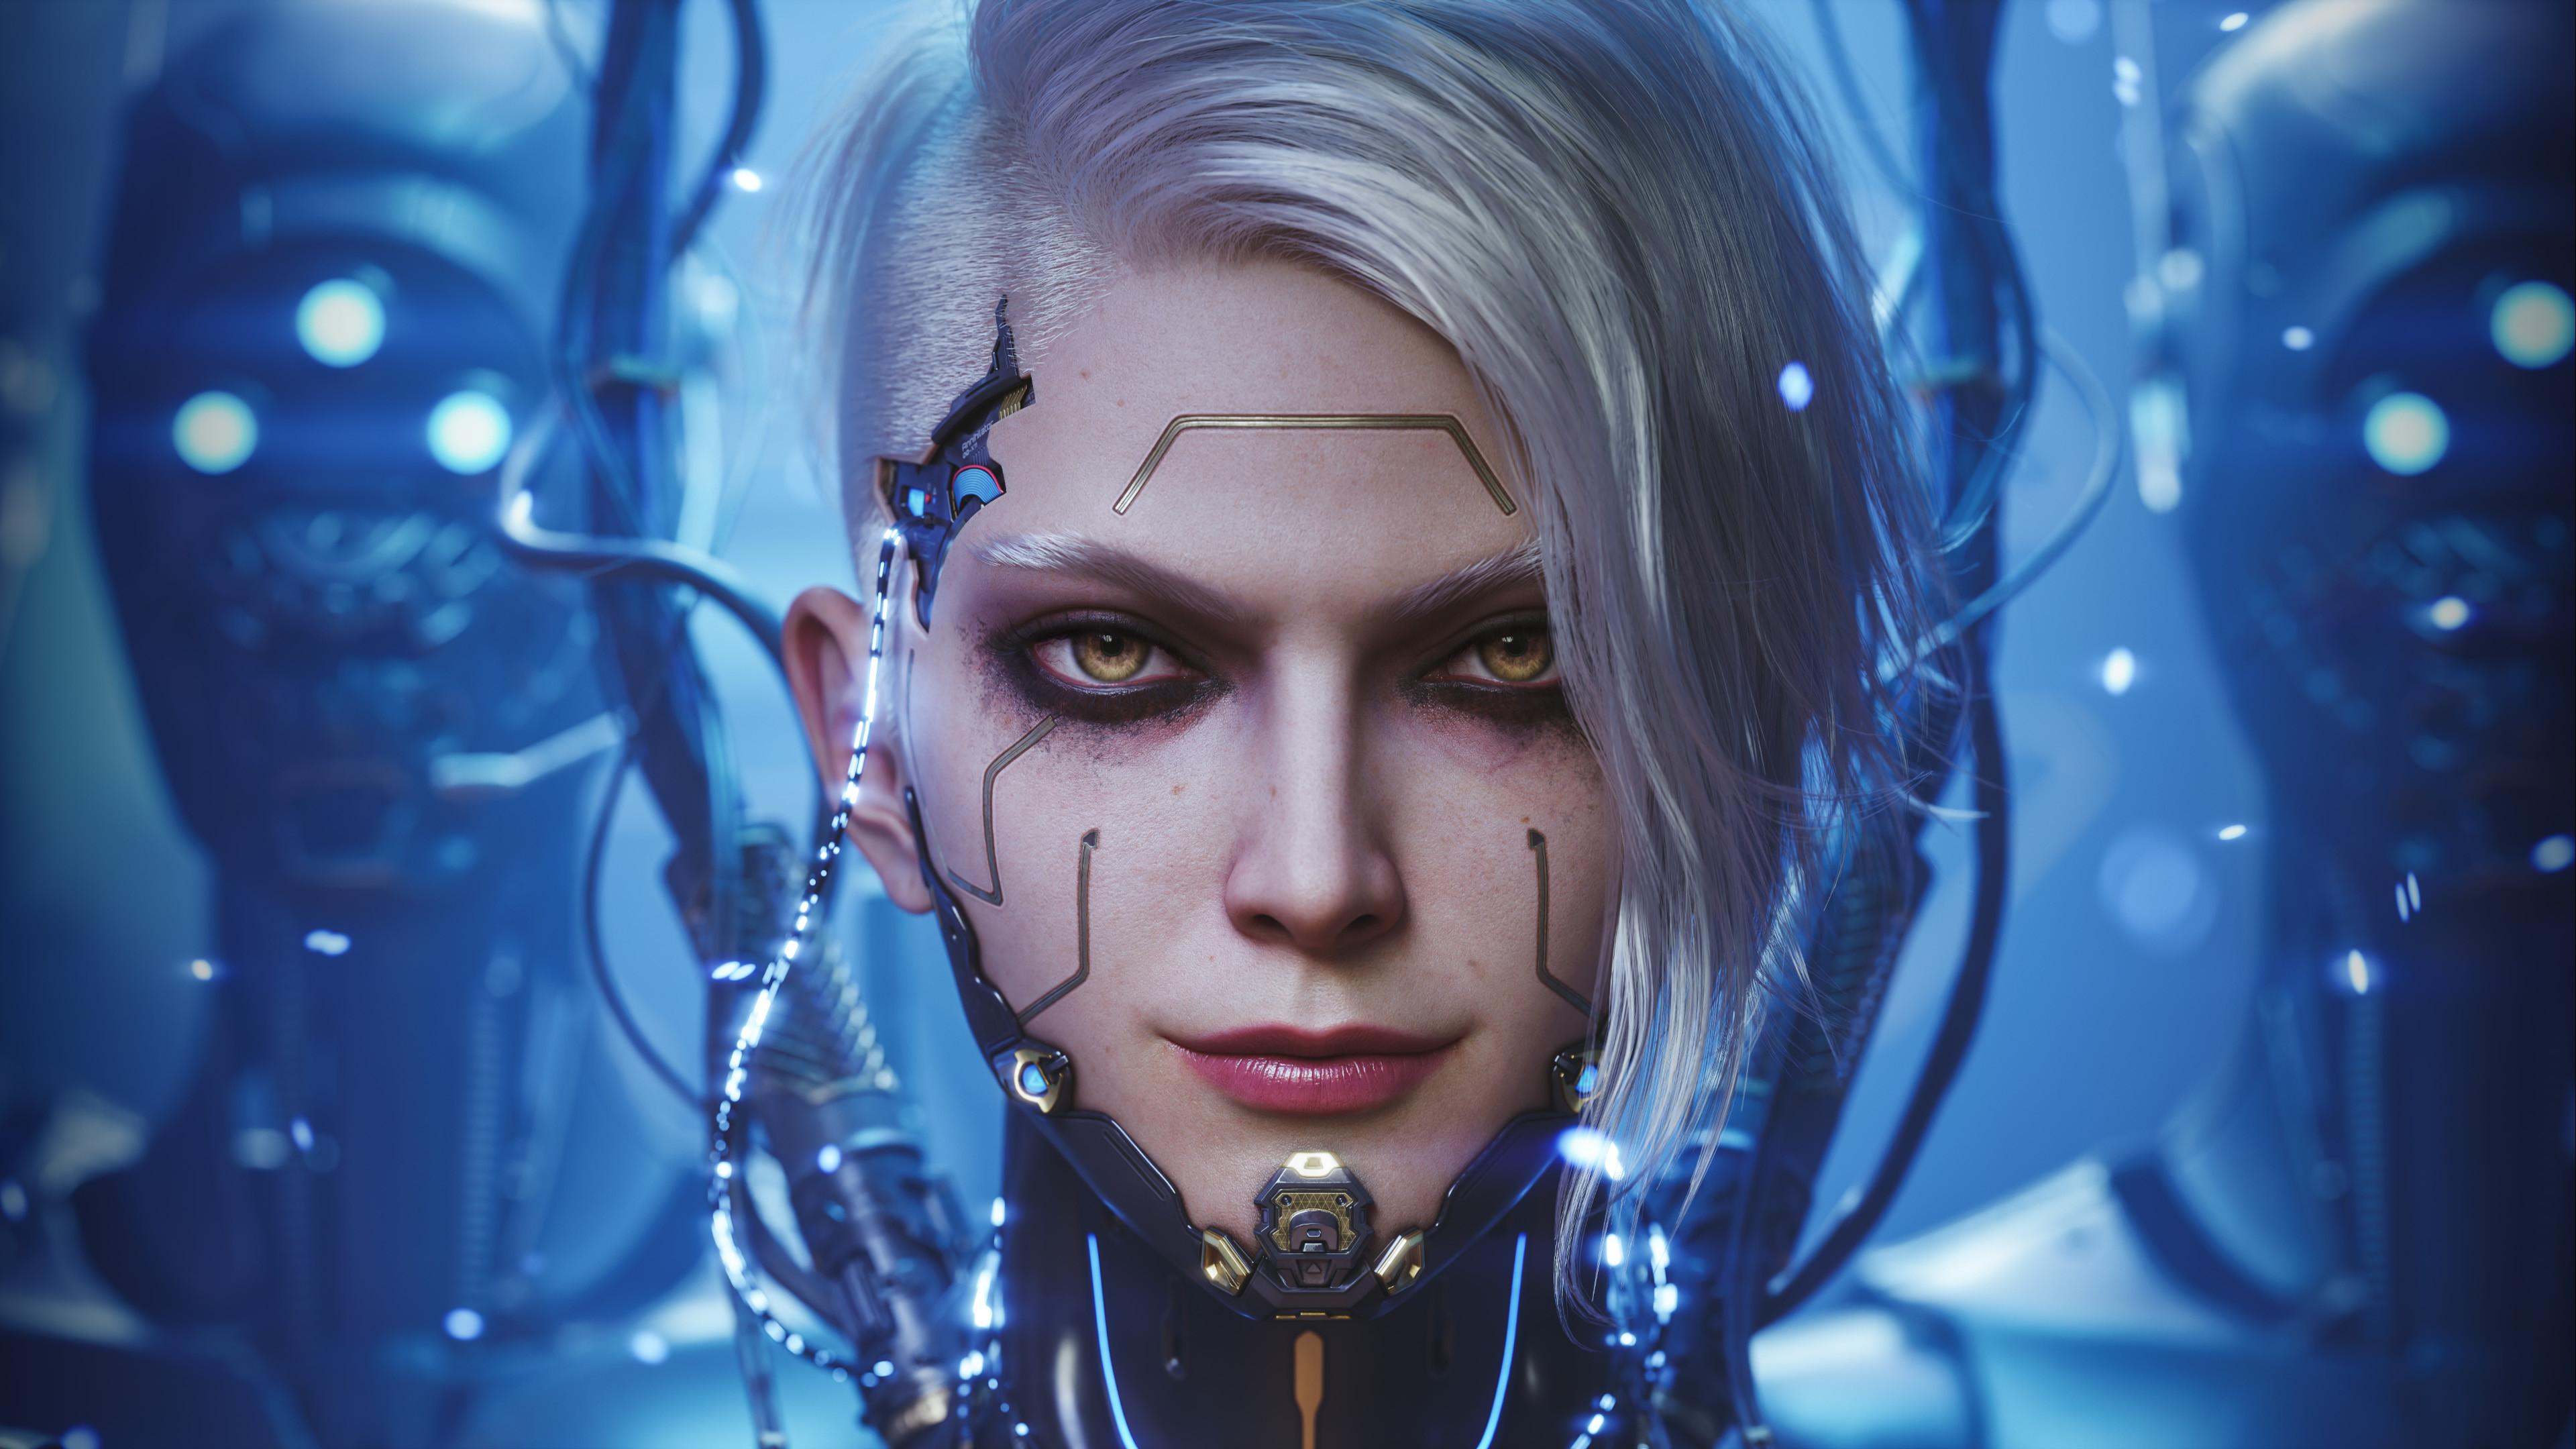 General 3840x2160 Huifeng Huang CGI cyberpunk portrait wires yellow eyes digital art closeup face looking at viewer frontal view closed mouth blurry background cables futuristic short hair cyborg smiling silver hair cyborg girl